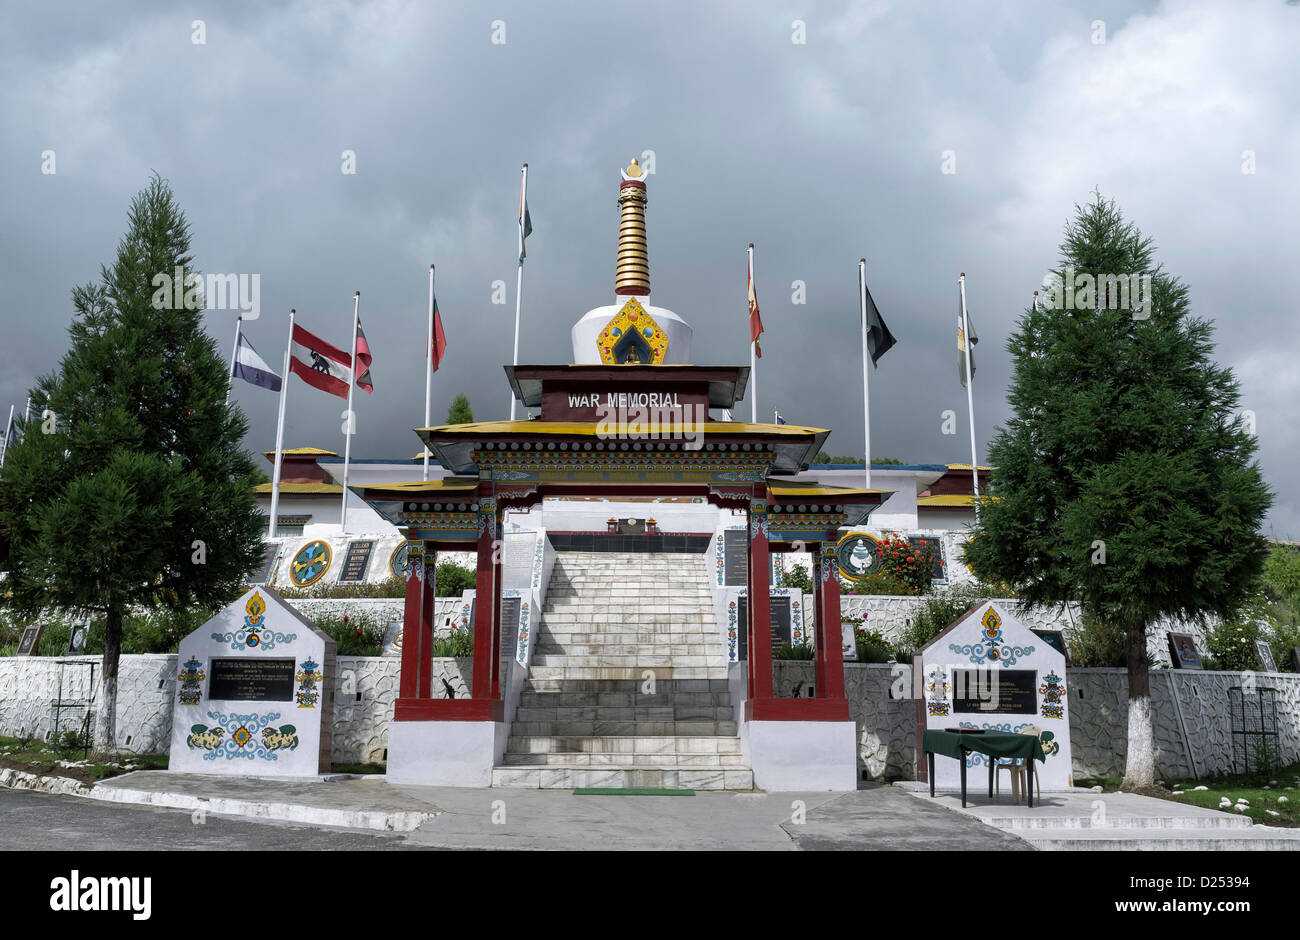 The memorial site in Tawang, Arunachal Pradesh, India in memory of the Indian soldiers killed in the Indo-China war of 1962. Stock Photo